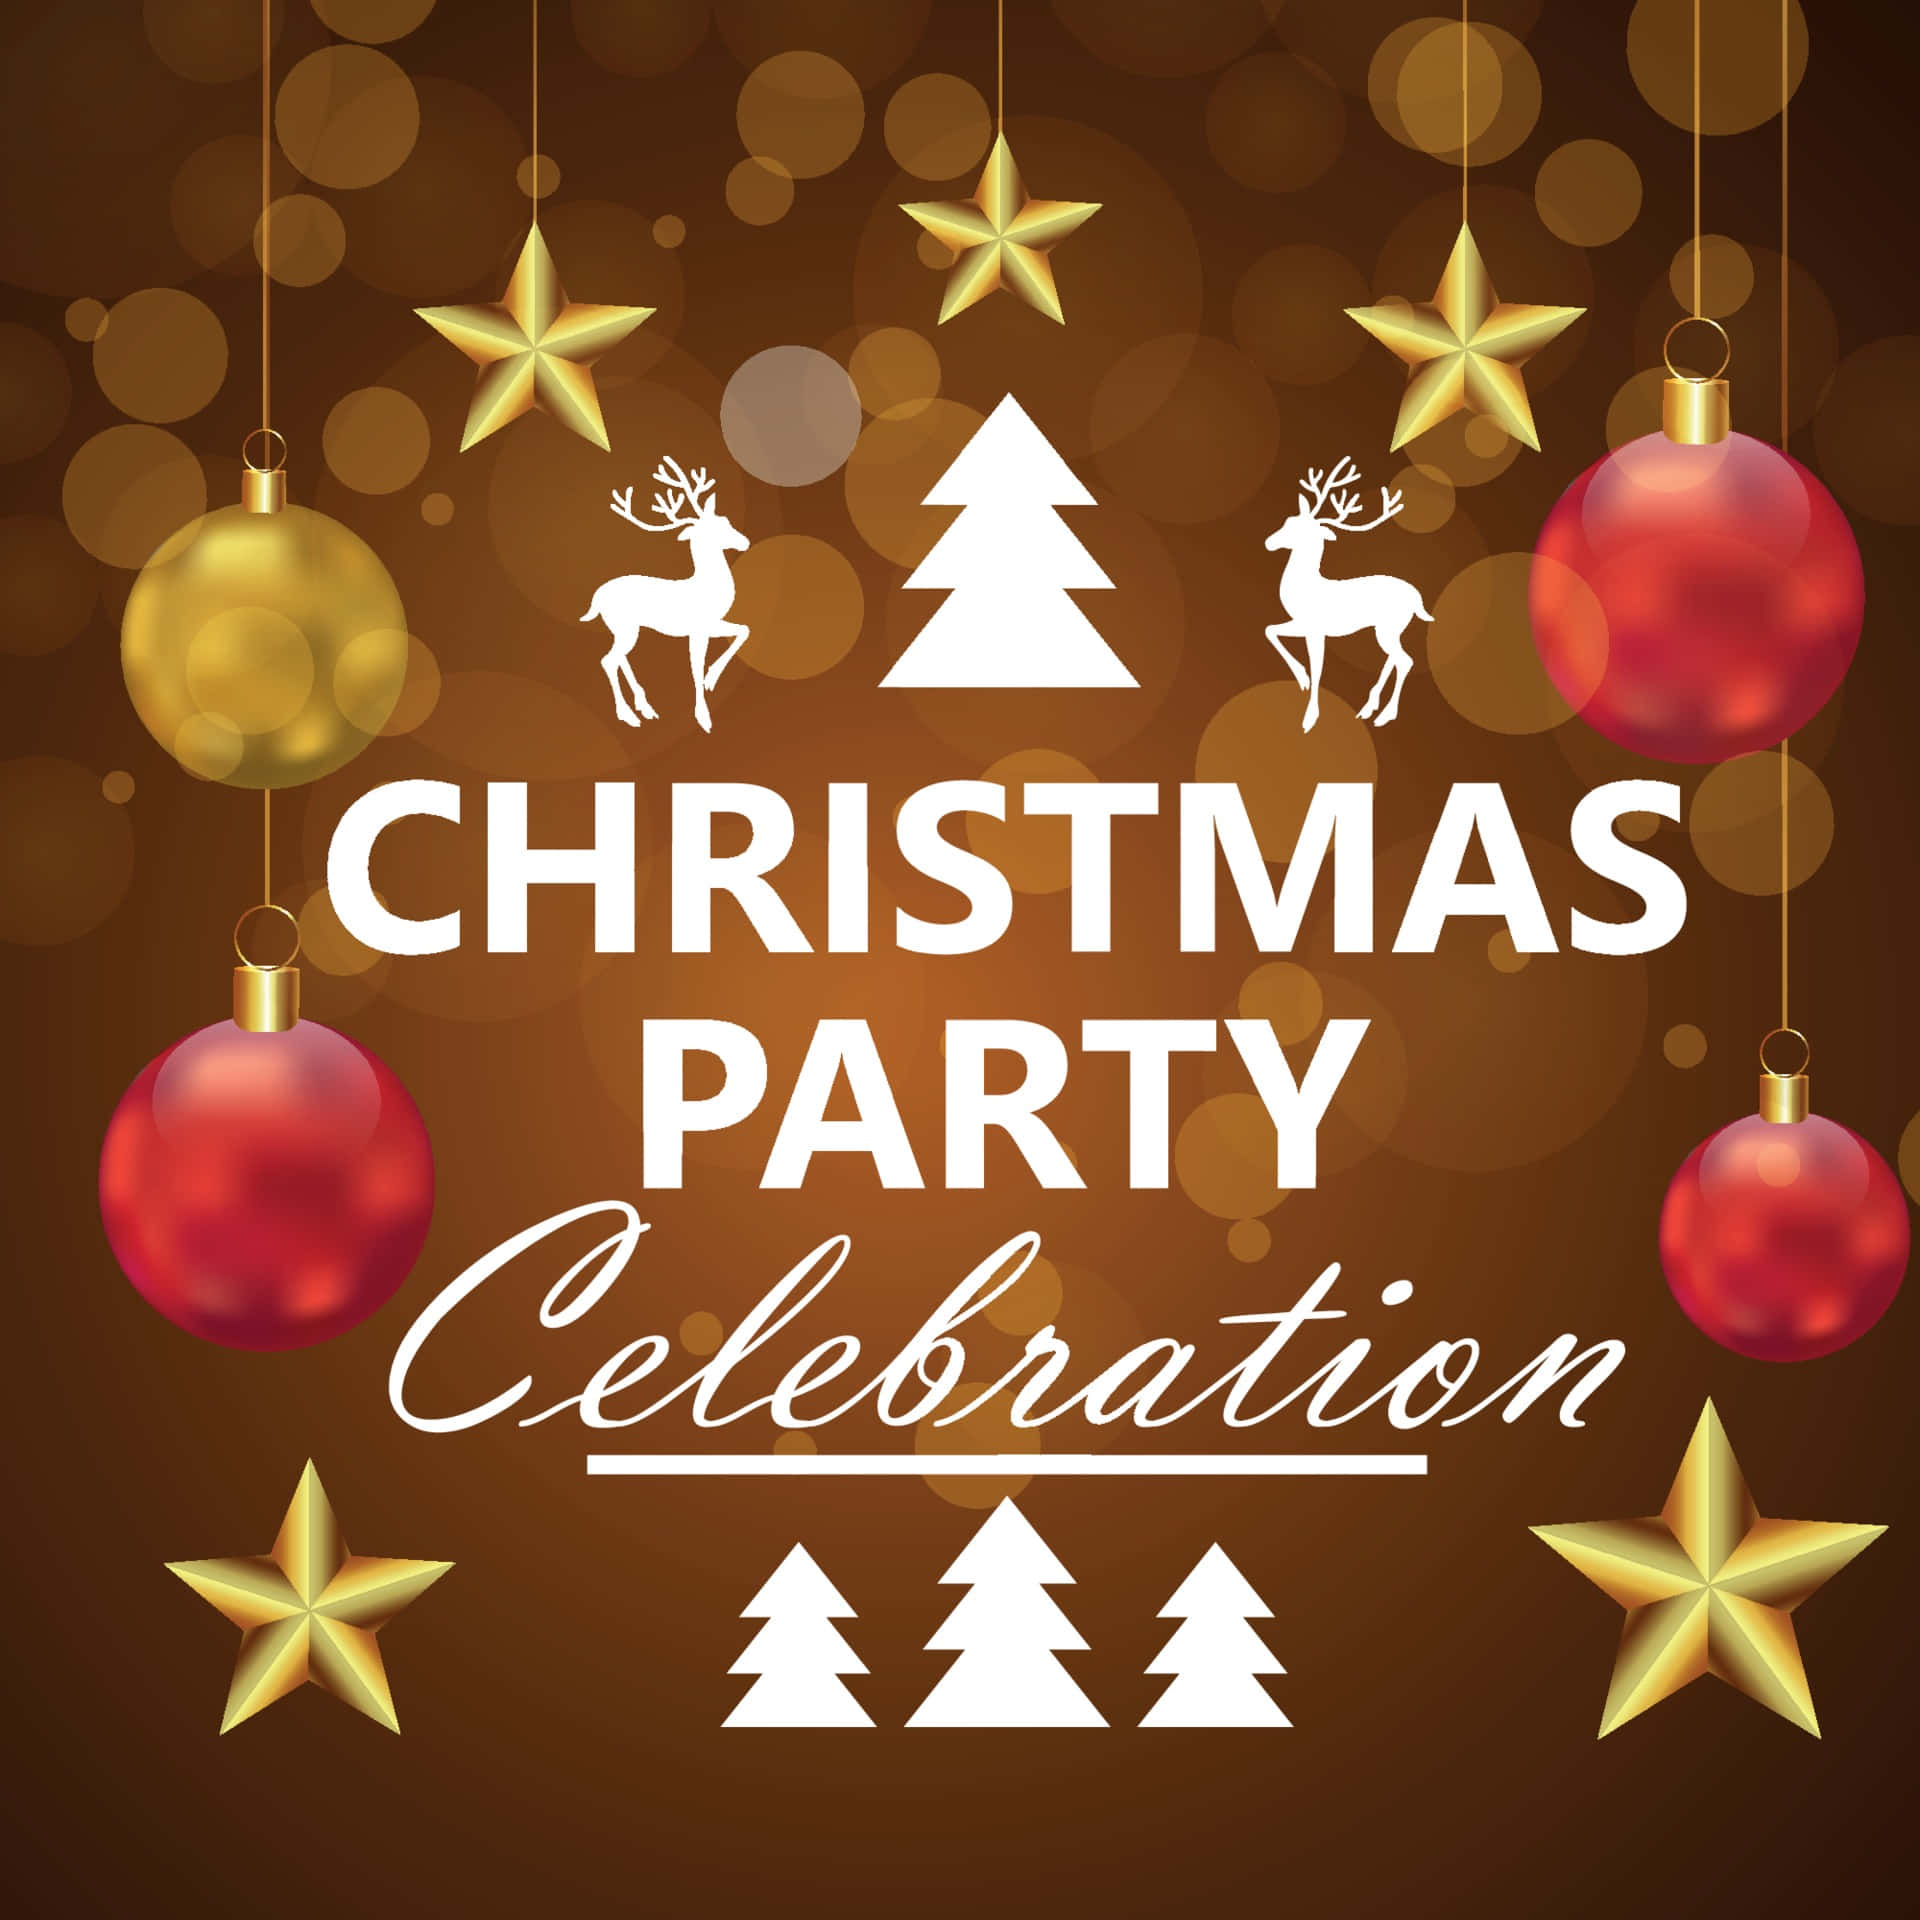 Download Get festive at your Christmas party with friends and family ...